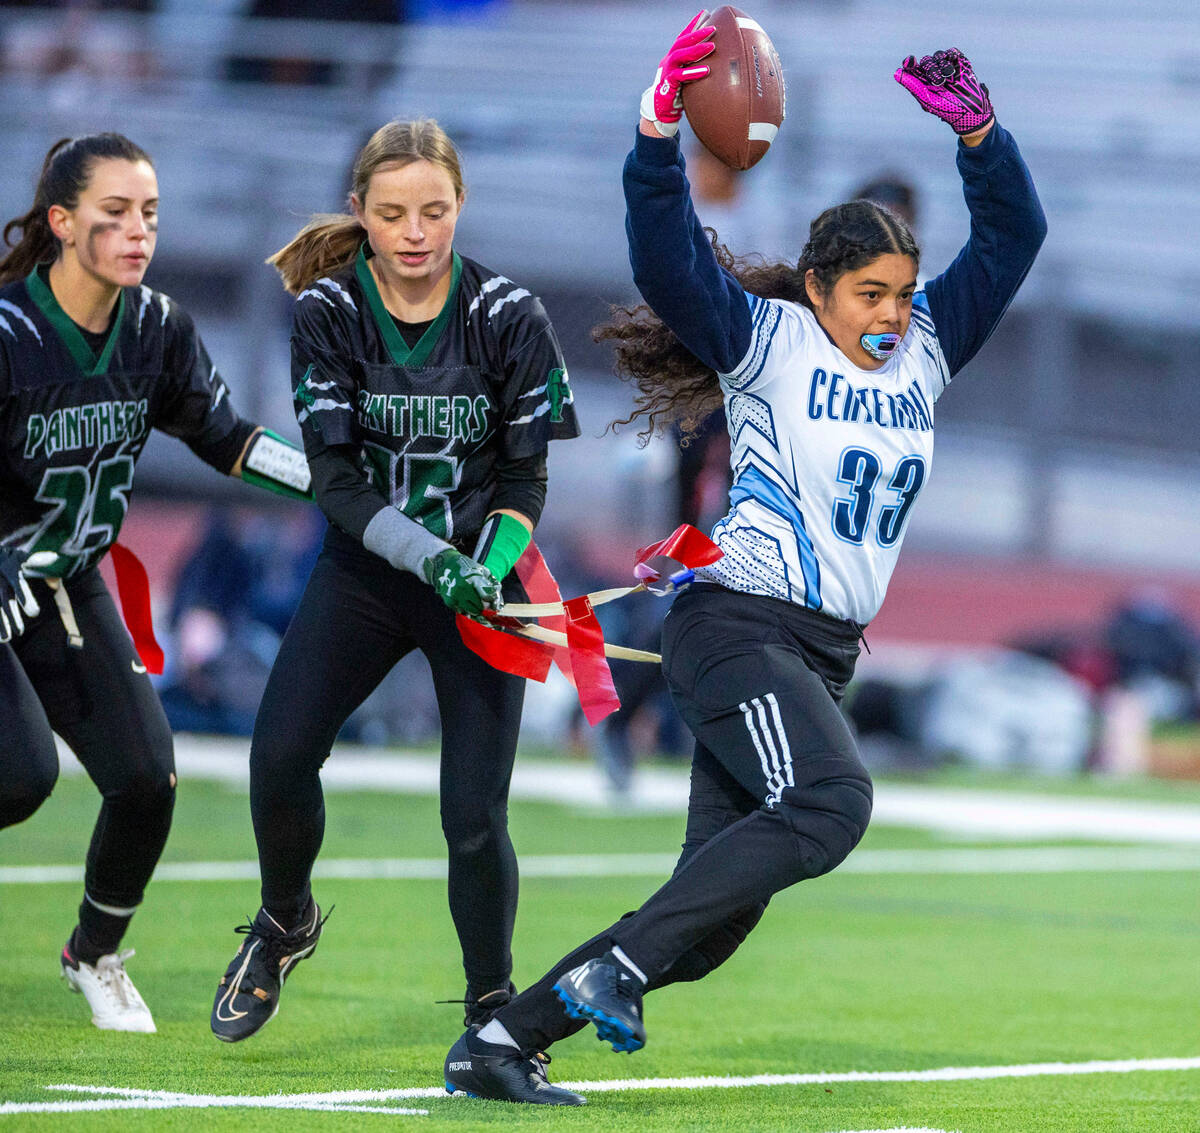 Centennial receiver Ana Cruz (33) has her flag pulled by Palo Verde Alexis Manzo (15) during th ...